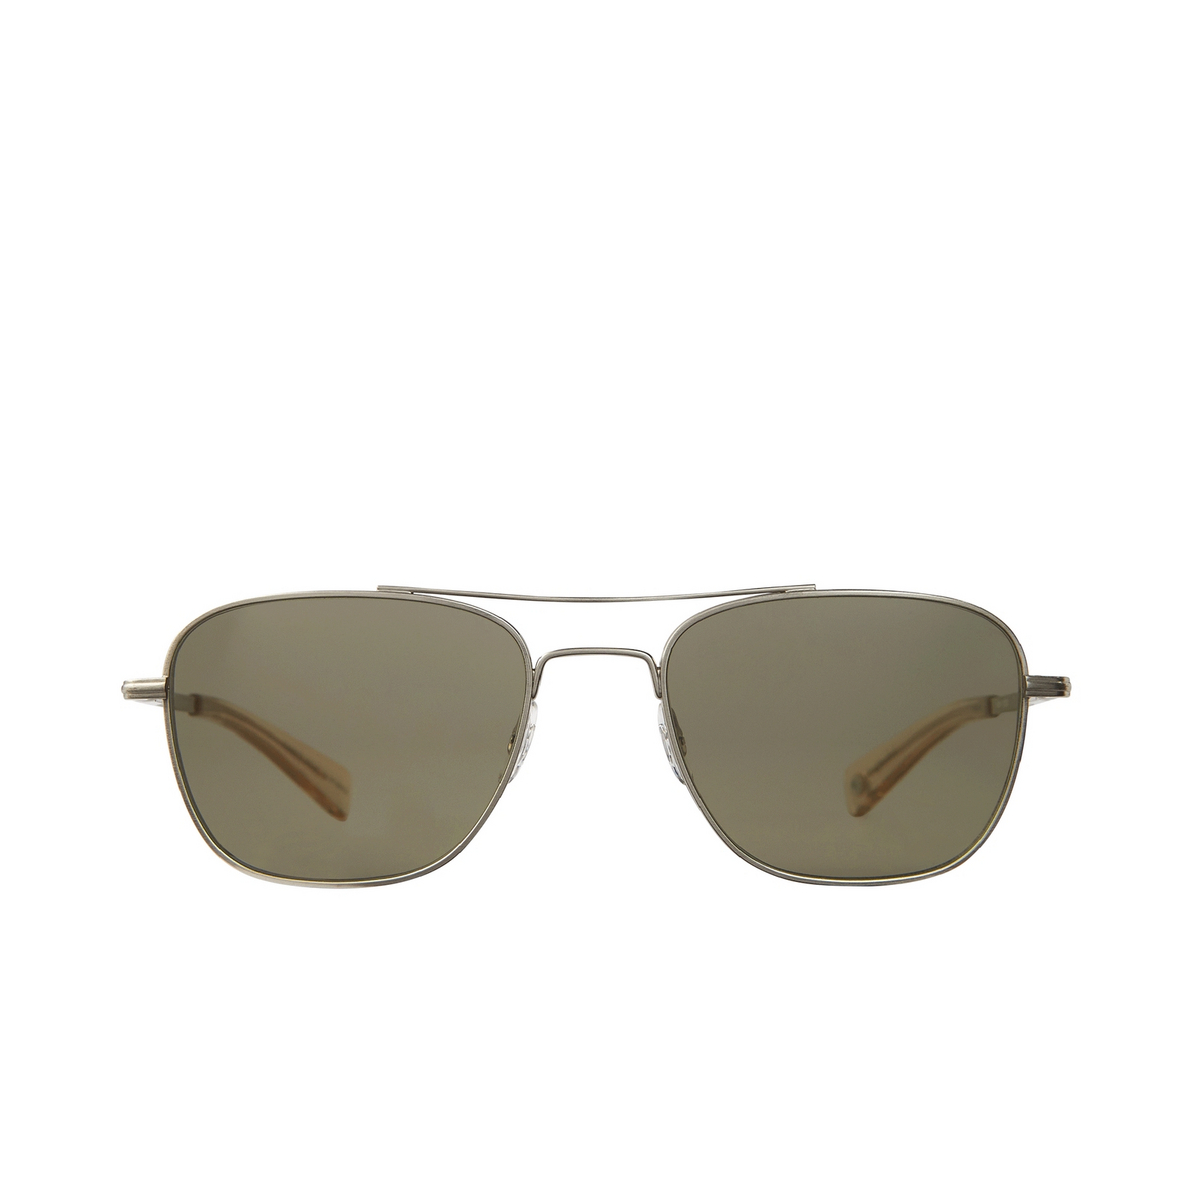 Garrett Leight® Aviator Sunglasses: Harbor Sun color BS-CH/G15SUV Brushed Silver-champagne/g15 Suv - front view